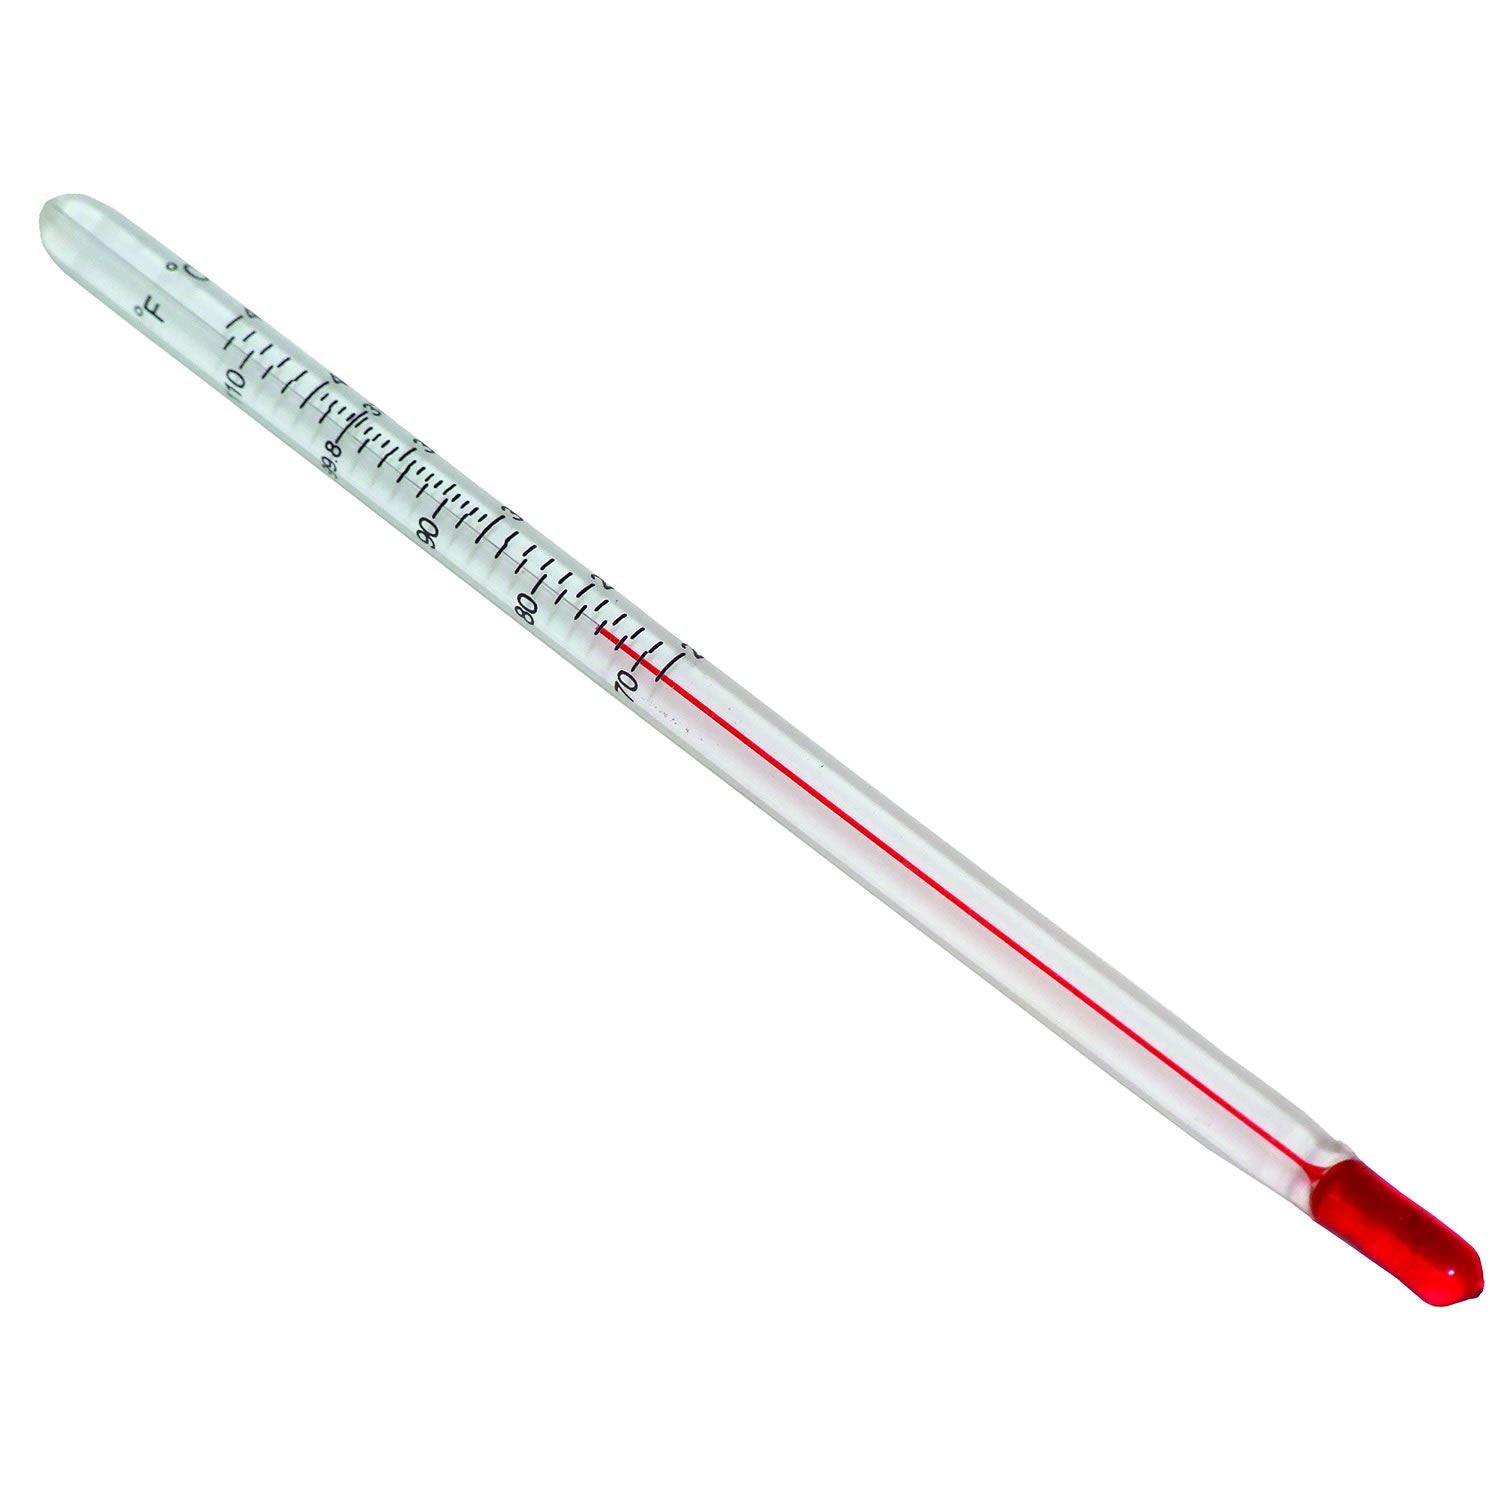 Chicktec Glass Stem Thermometer - Just Horse Riders